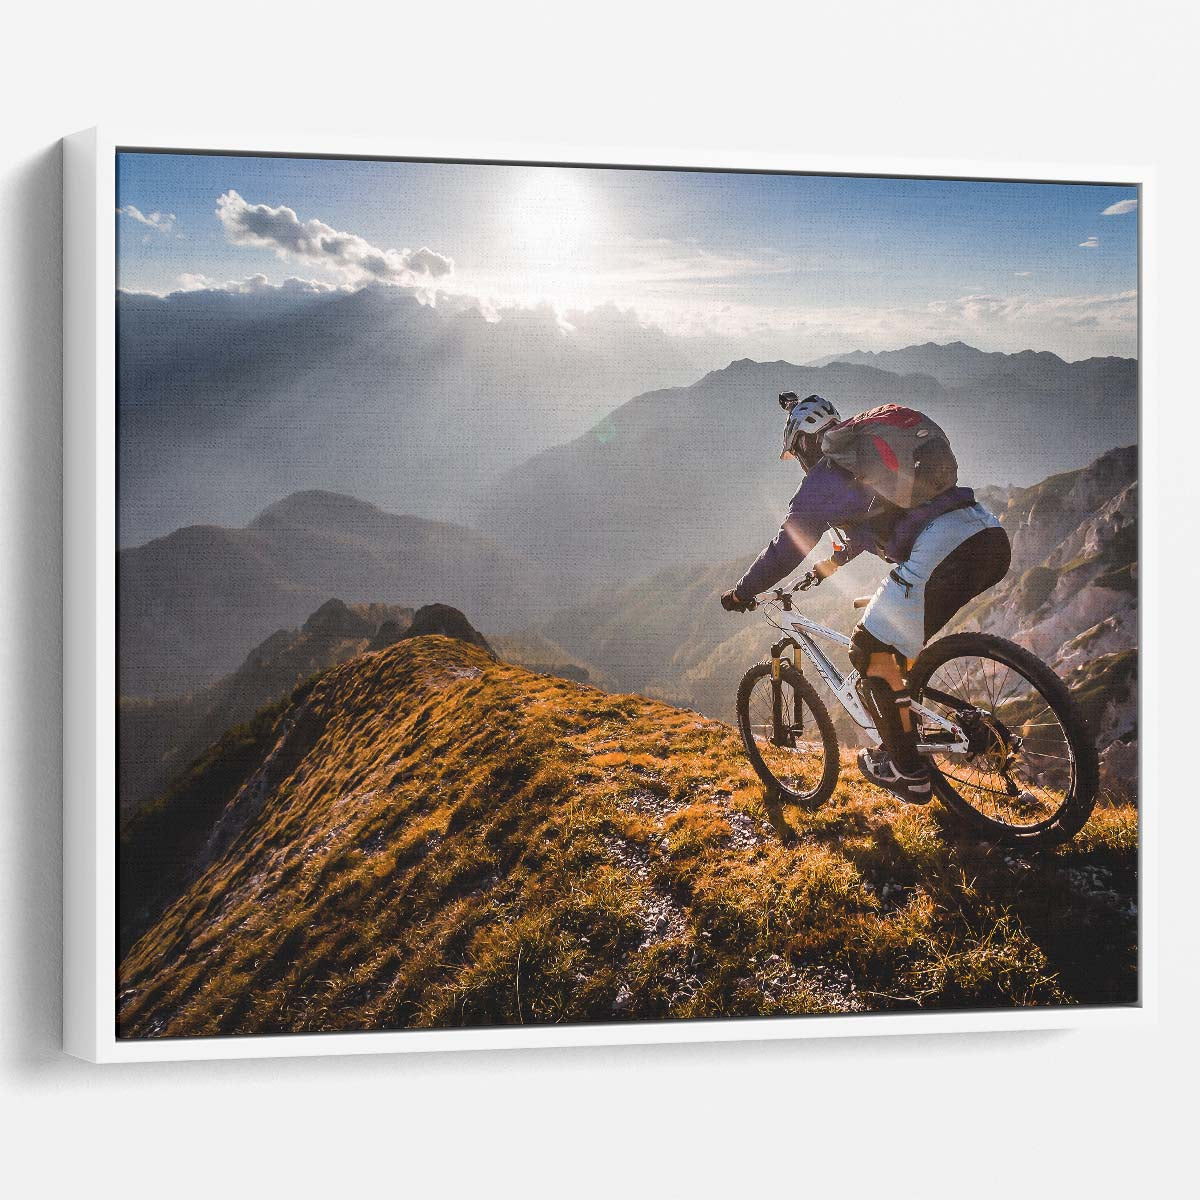 Extreme Mountain Biking Adventure Landscape Wall Art by Luxuriance Designs. Made in USA.